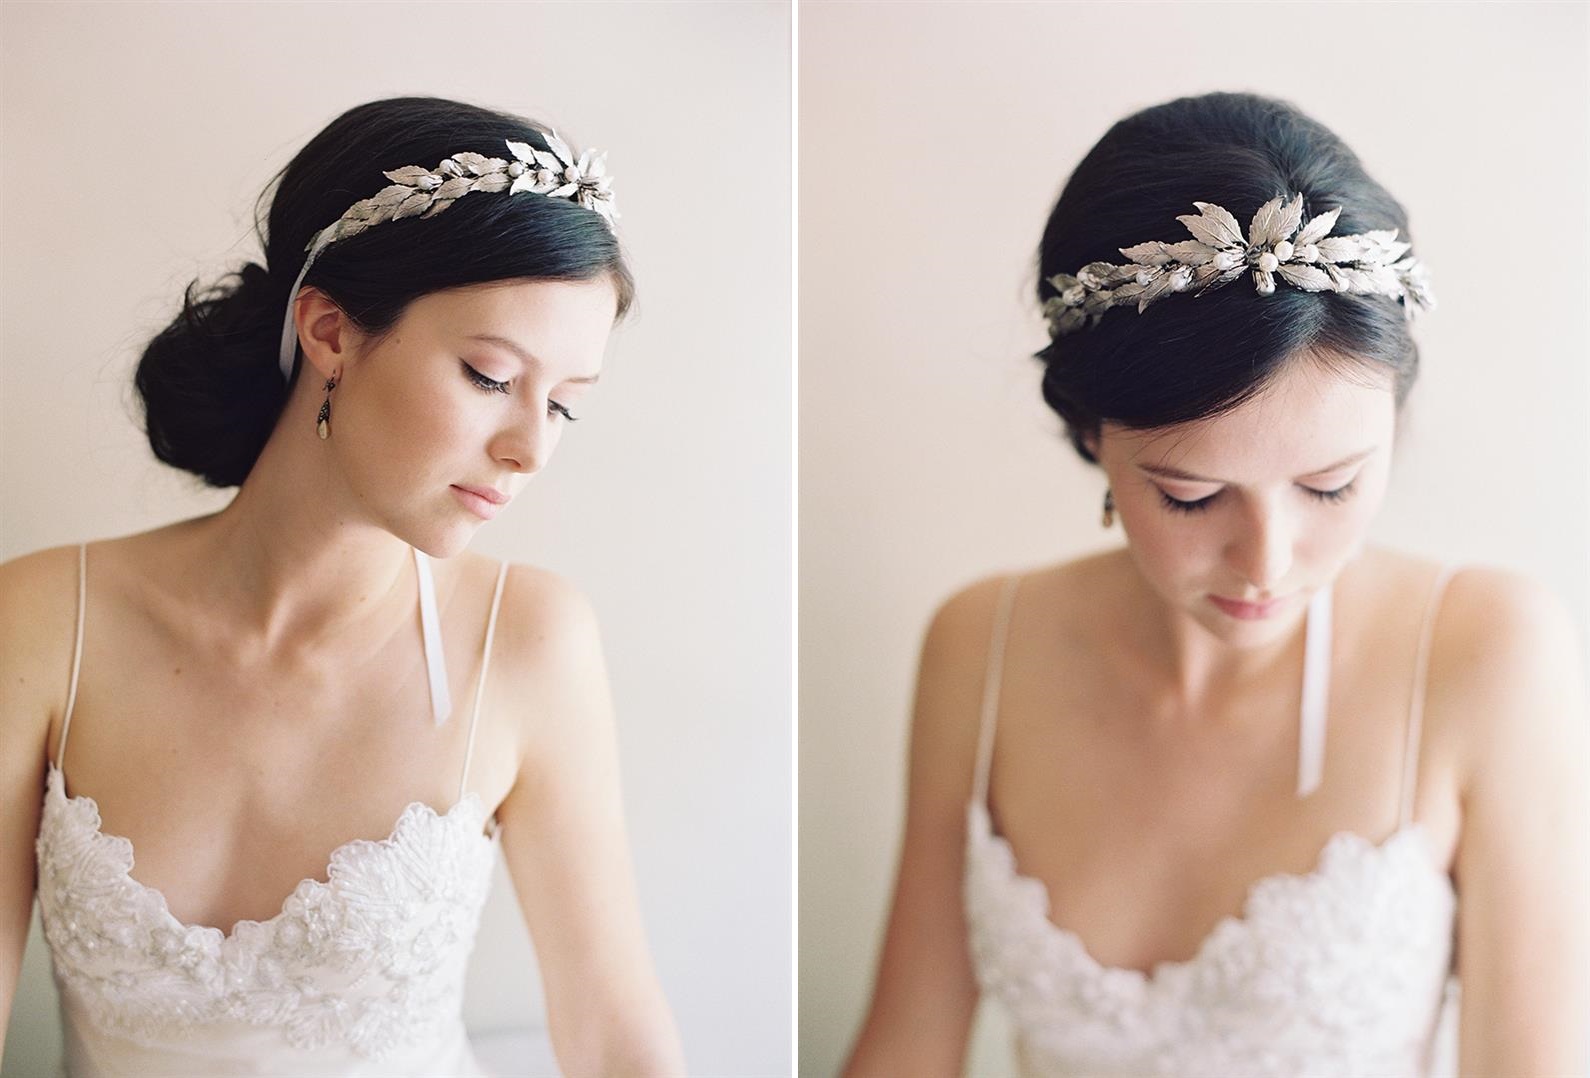 Bridal Crown from Erica Elizabeth Designs English Rose Collection